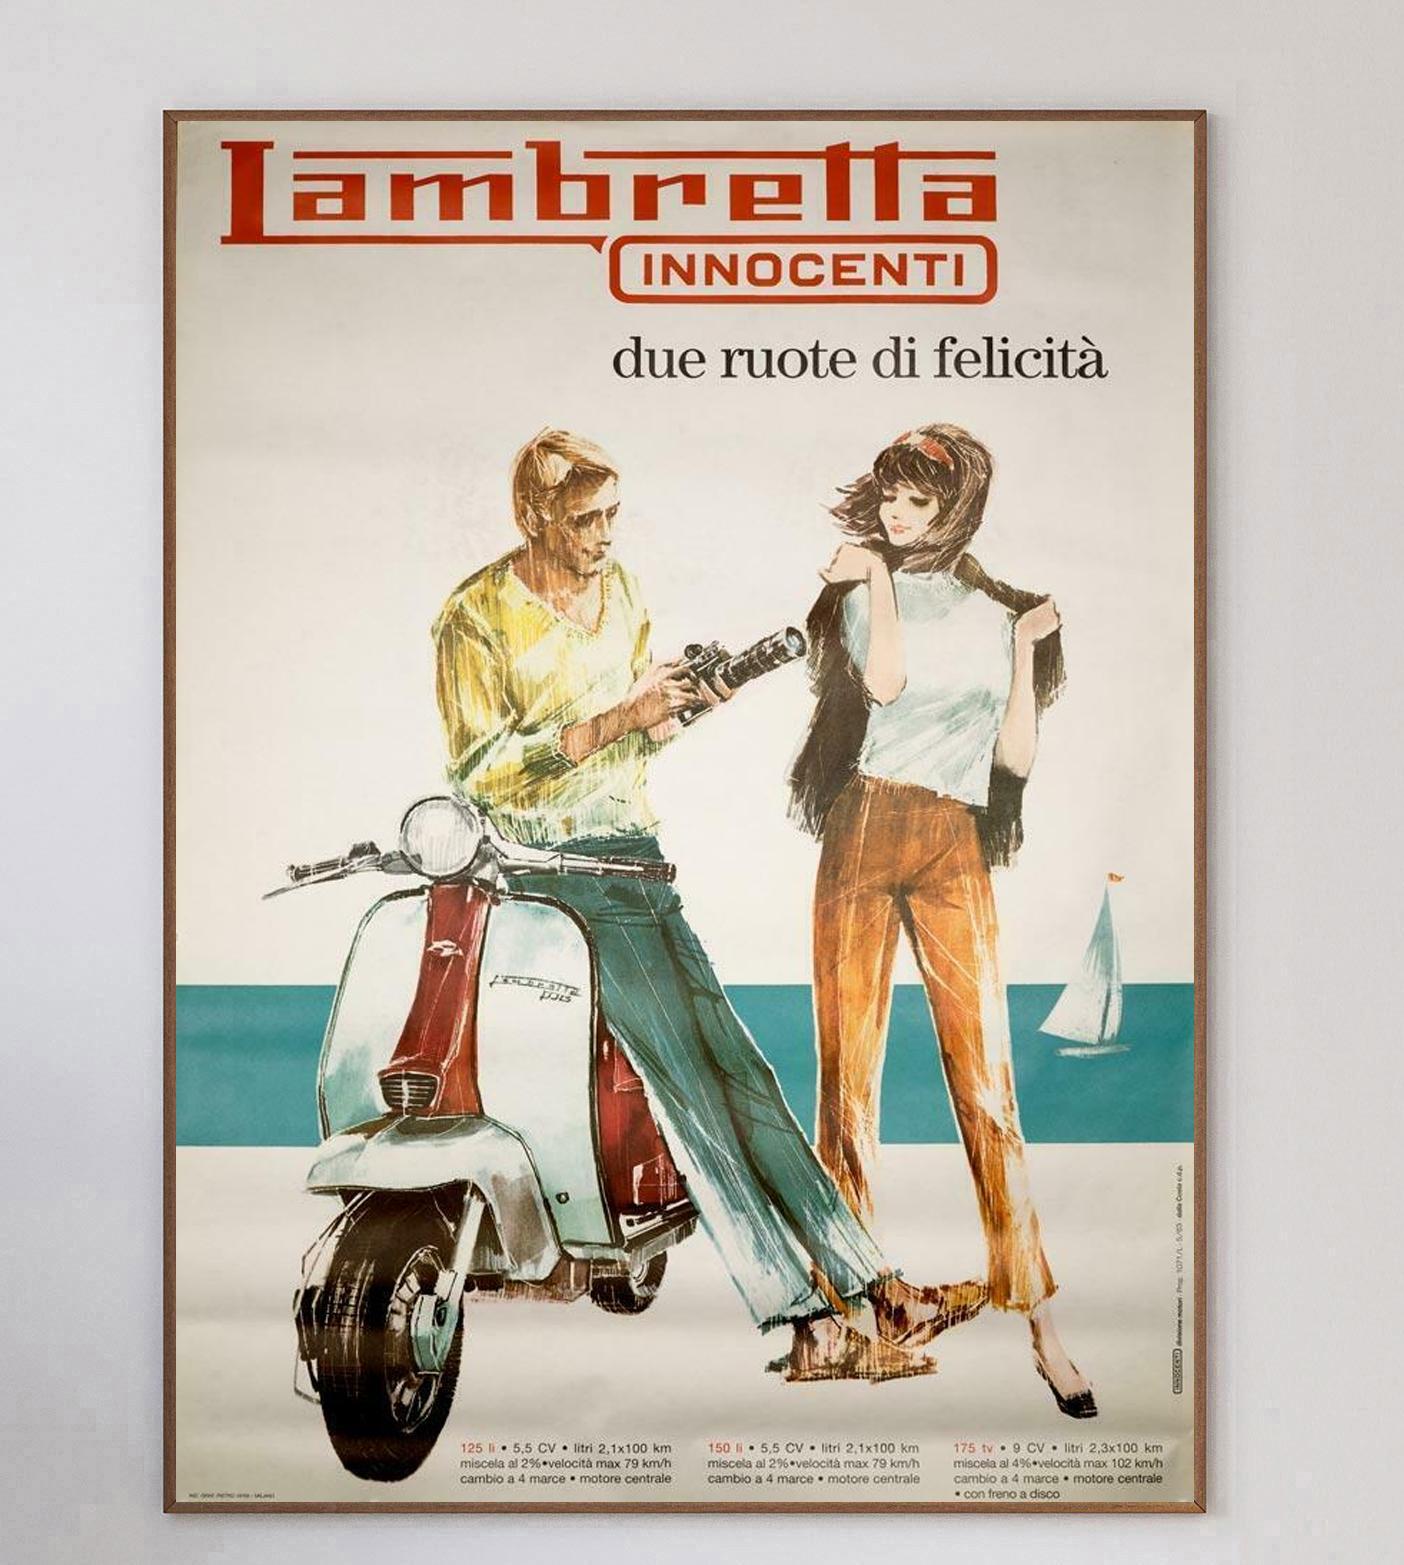 Beginning in 1947 in Milan, Lambretta scooters were produced until 1972 when the producers, Innocenti was sold to BLMC. Helping define a generation of cool, the iconic bikes are still beloved to this day with clubs and enthusiasts worldwide. This